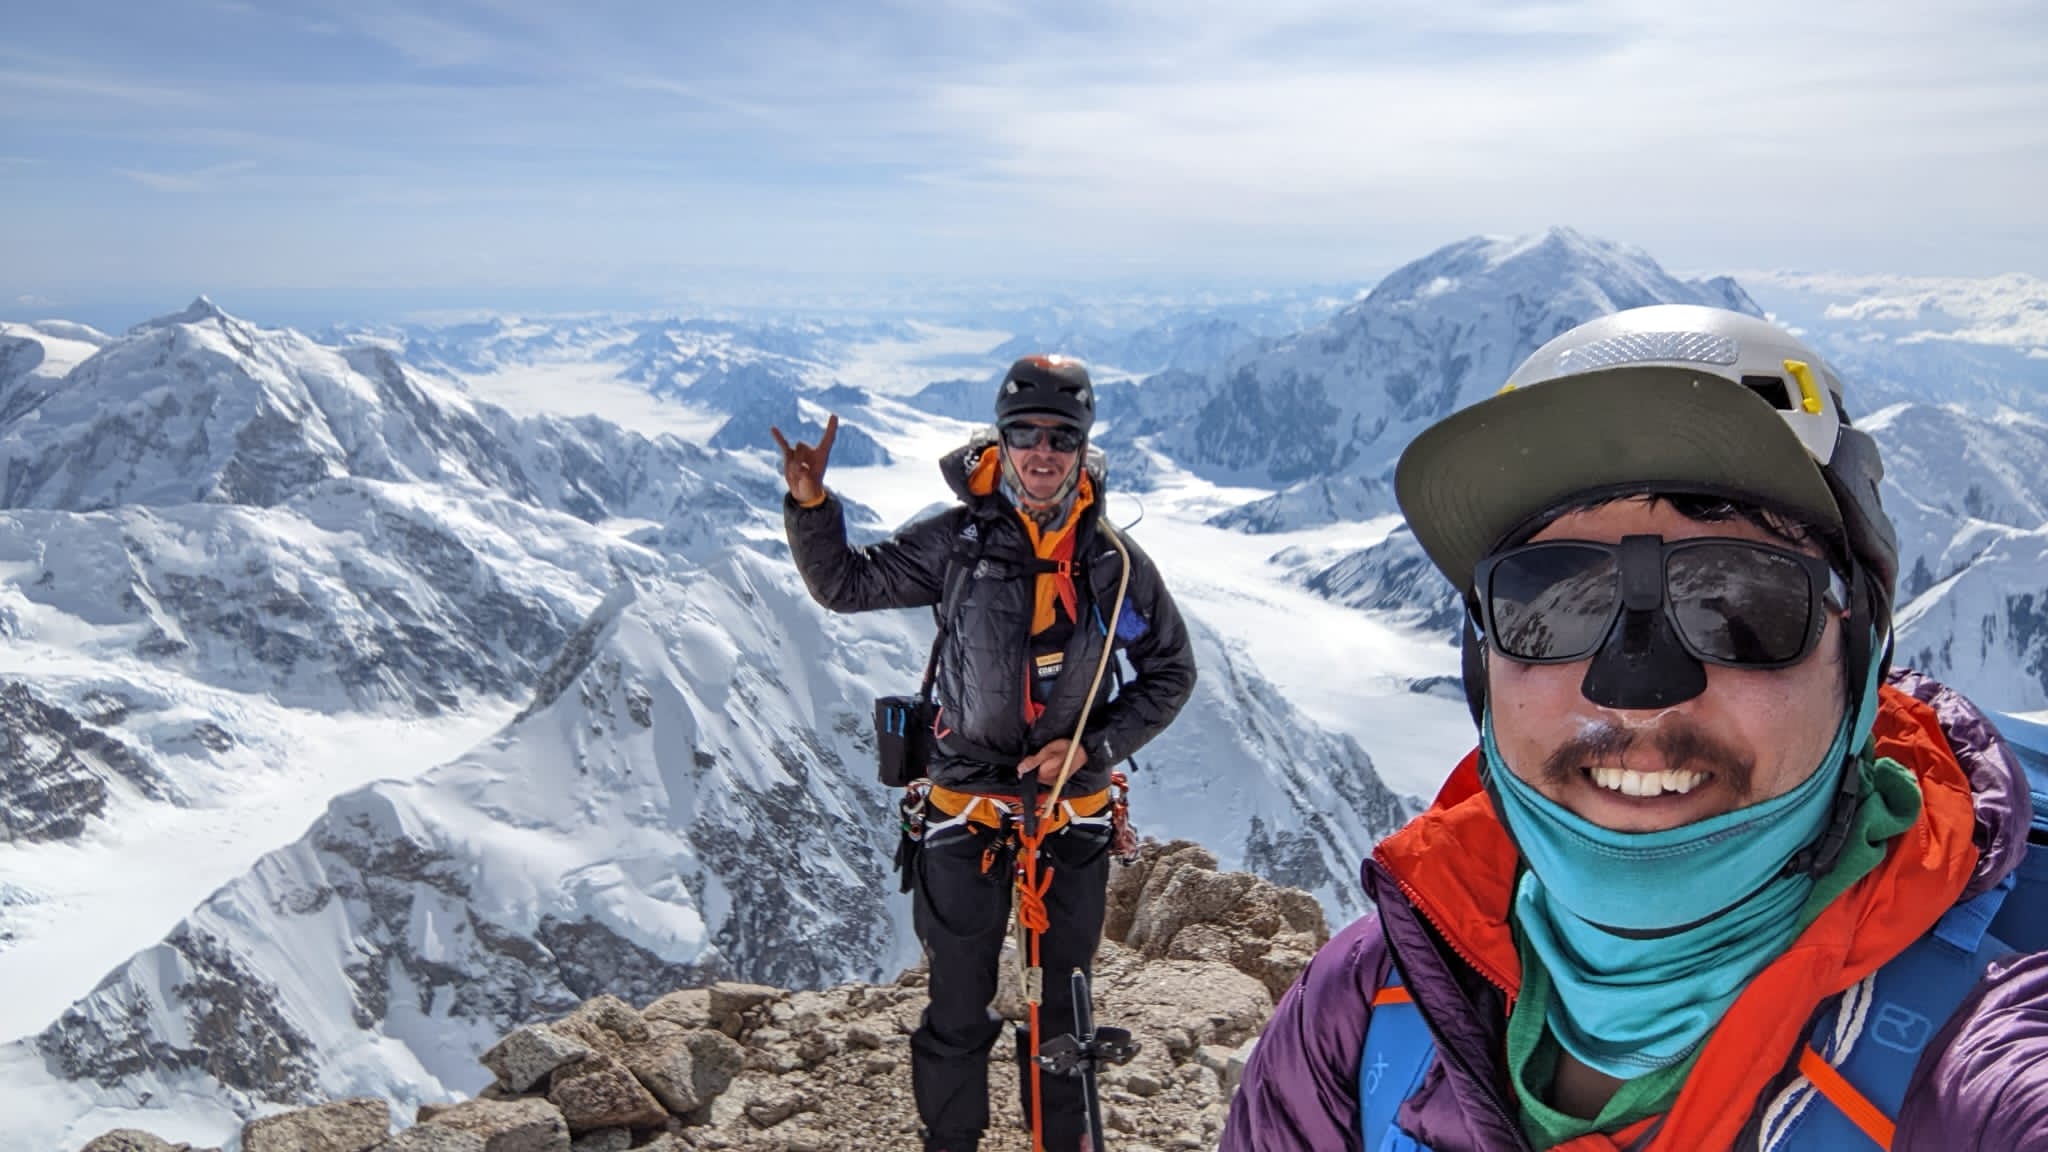 Two men in bright climbing gear, helmets, and sunglasses post on a rock ledge